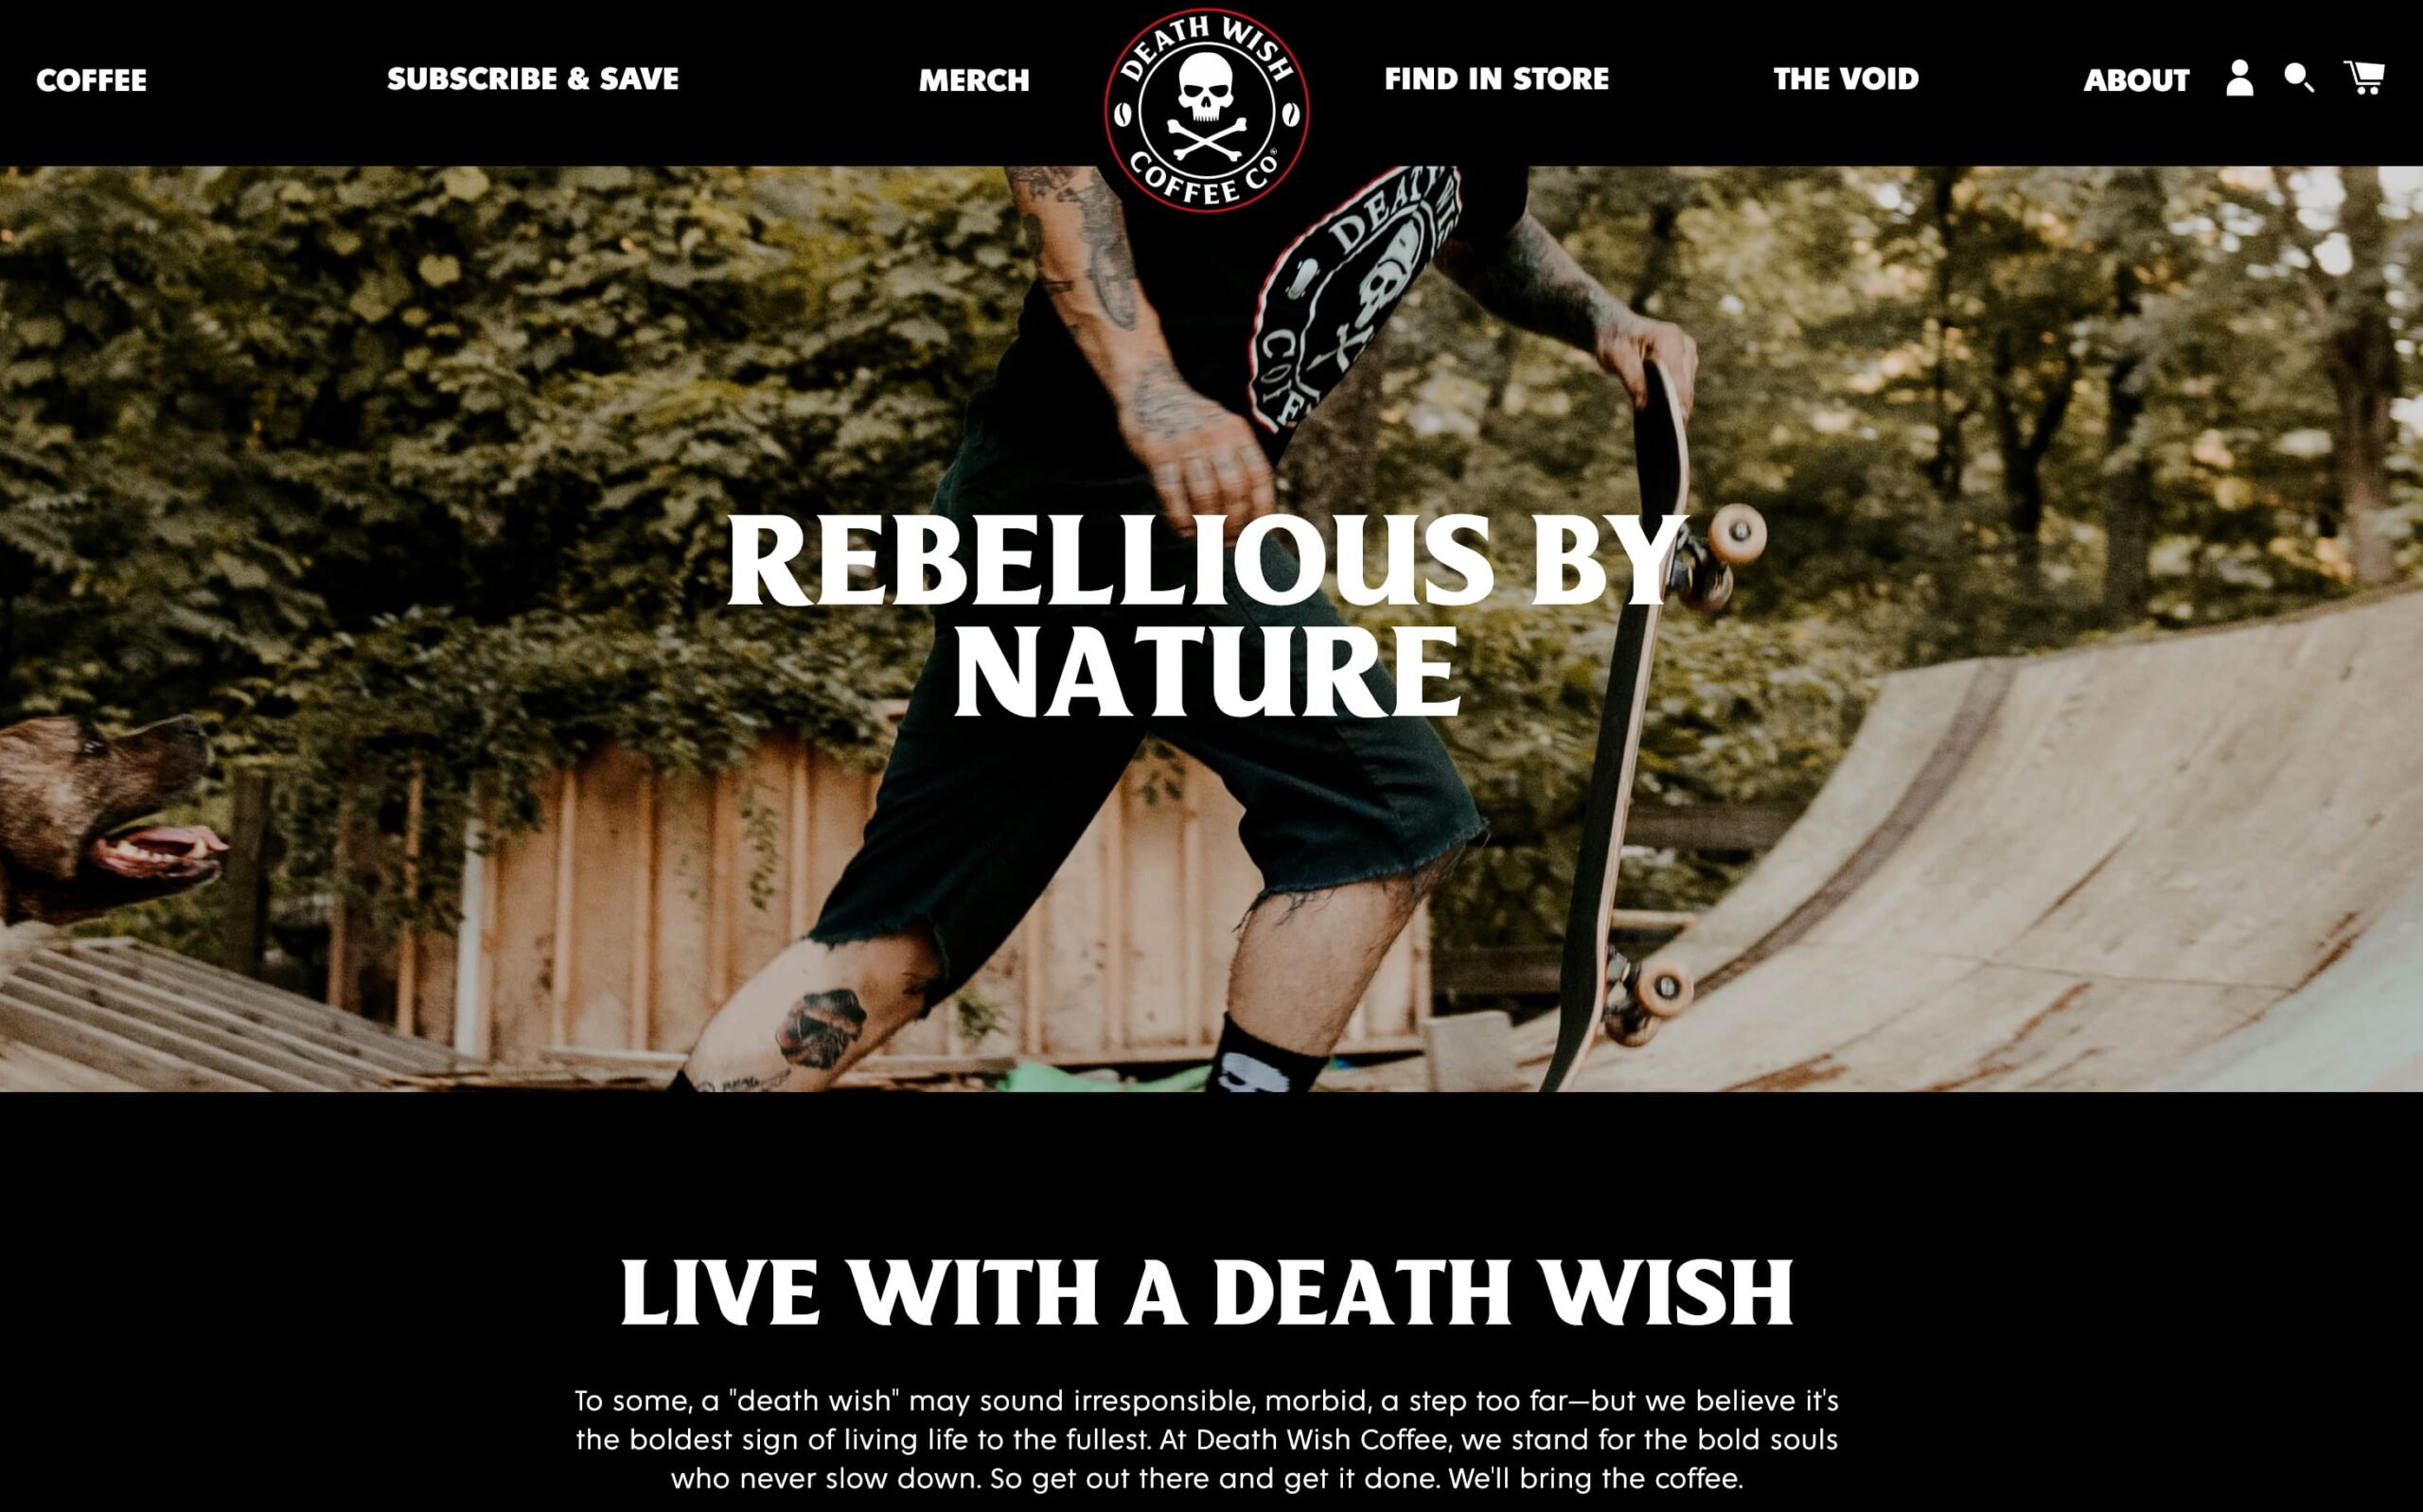 shopify online store death wish coffee has a a good mission. "Rebellious by nature: live with a death wish"